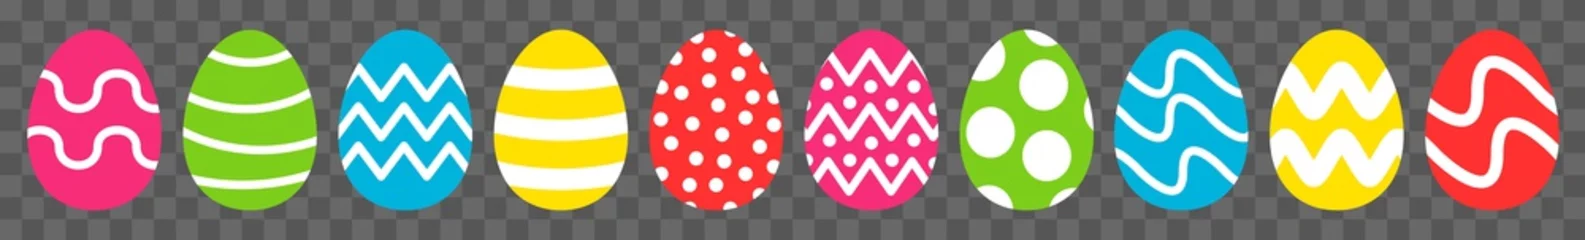 Rollo Easter Egg Icon Color   Painted Eggs Illustration   Happy Easter Hunt Symbol   Holiday Logo   April Spring Sign   Isolated   Variations © endstern